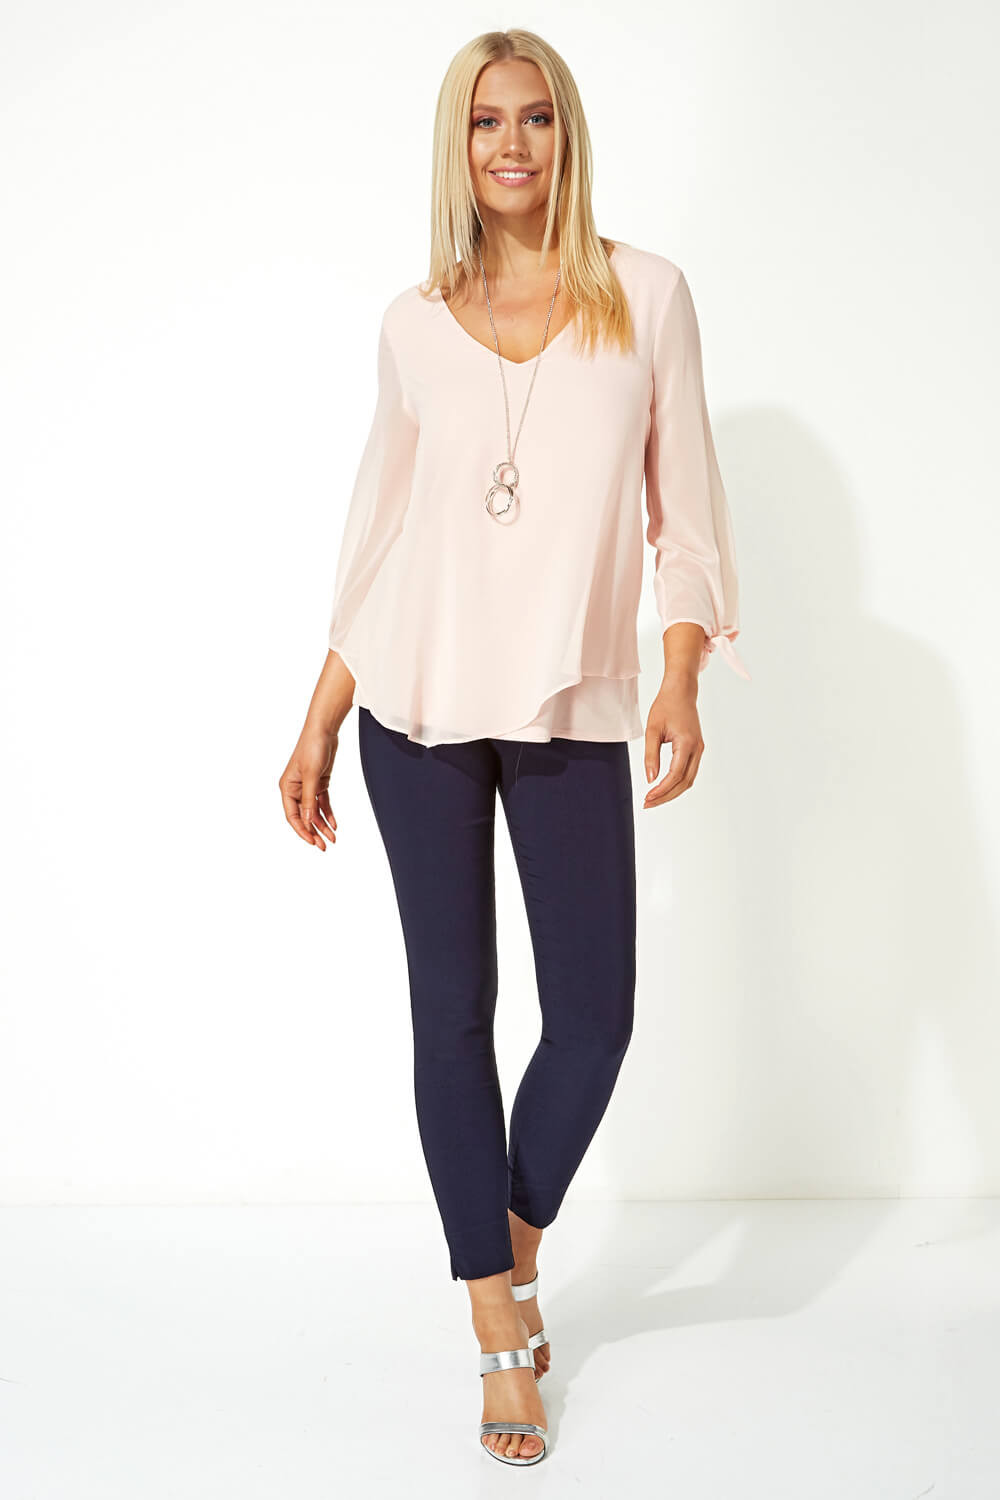 PINK Necklace Trim Jersey 3/4 Sleeve Chiffon Top, Image 2 of 4